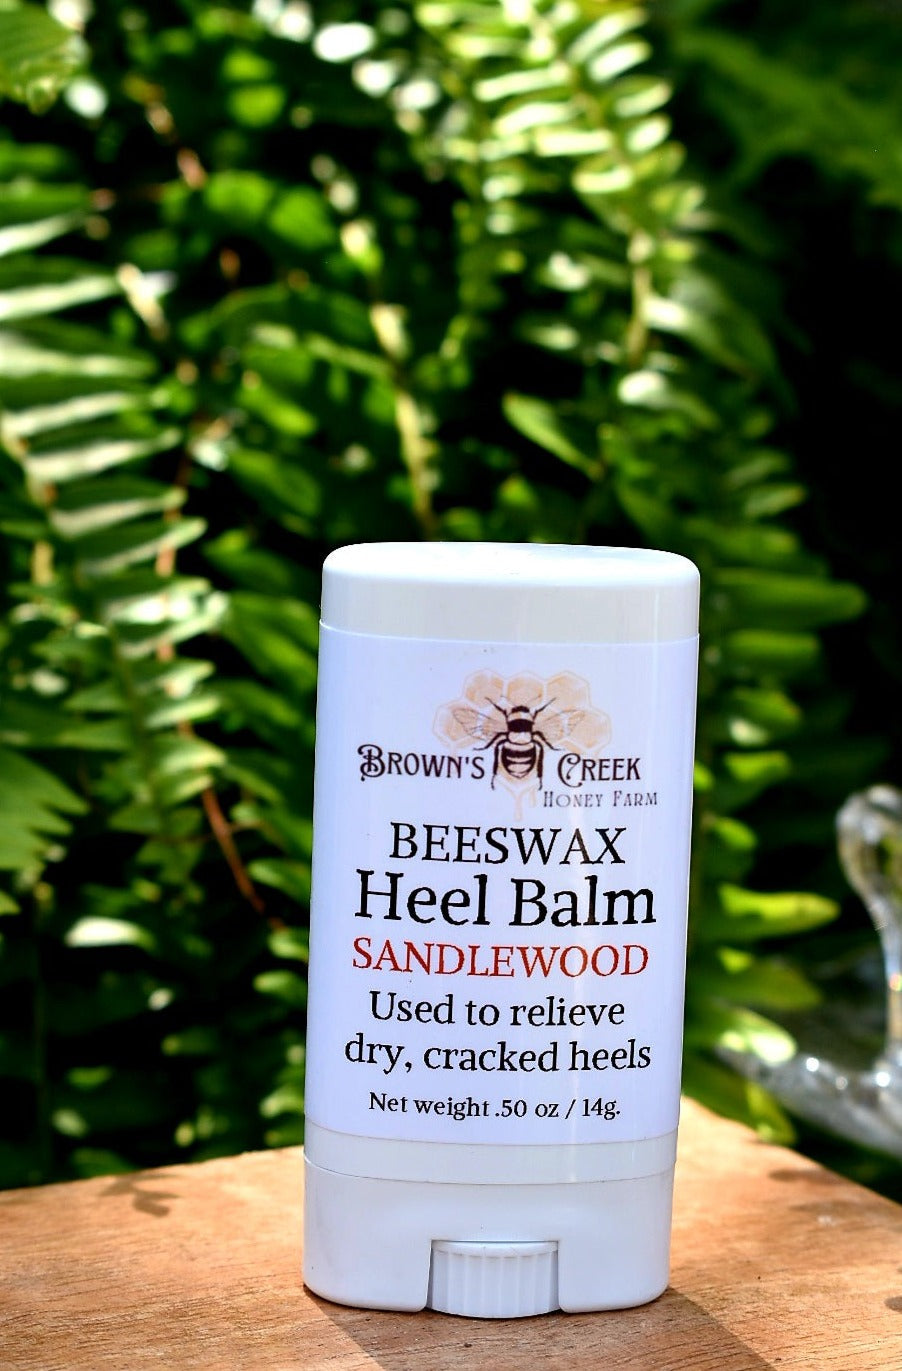 Beeswax Heel Balm in an easy to use applicator